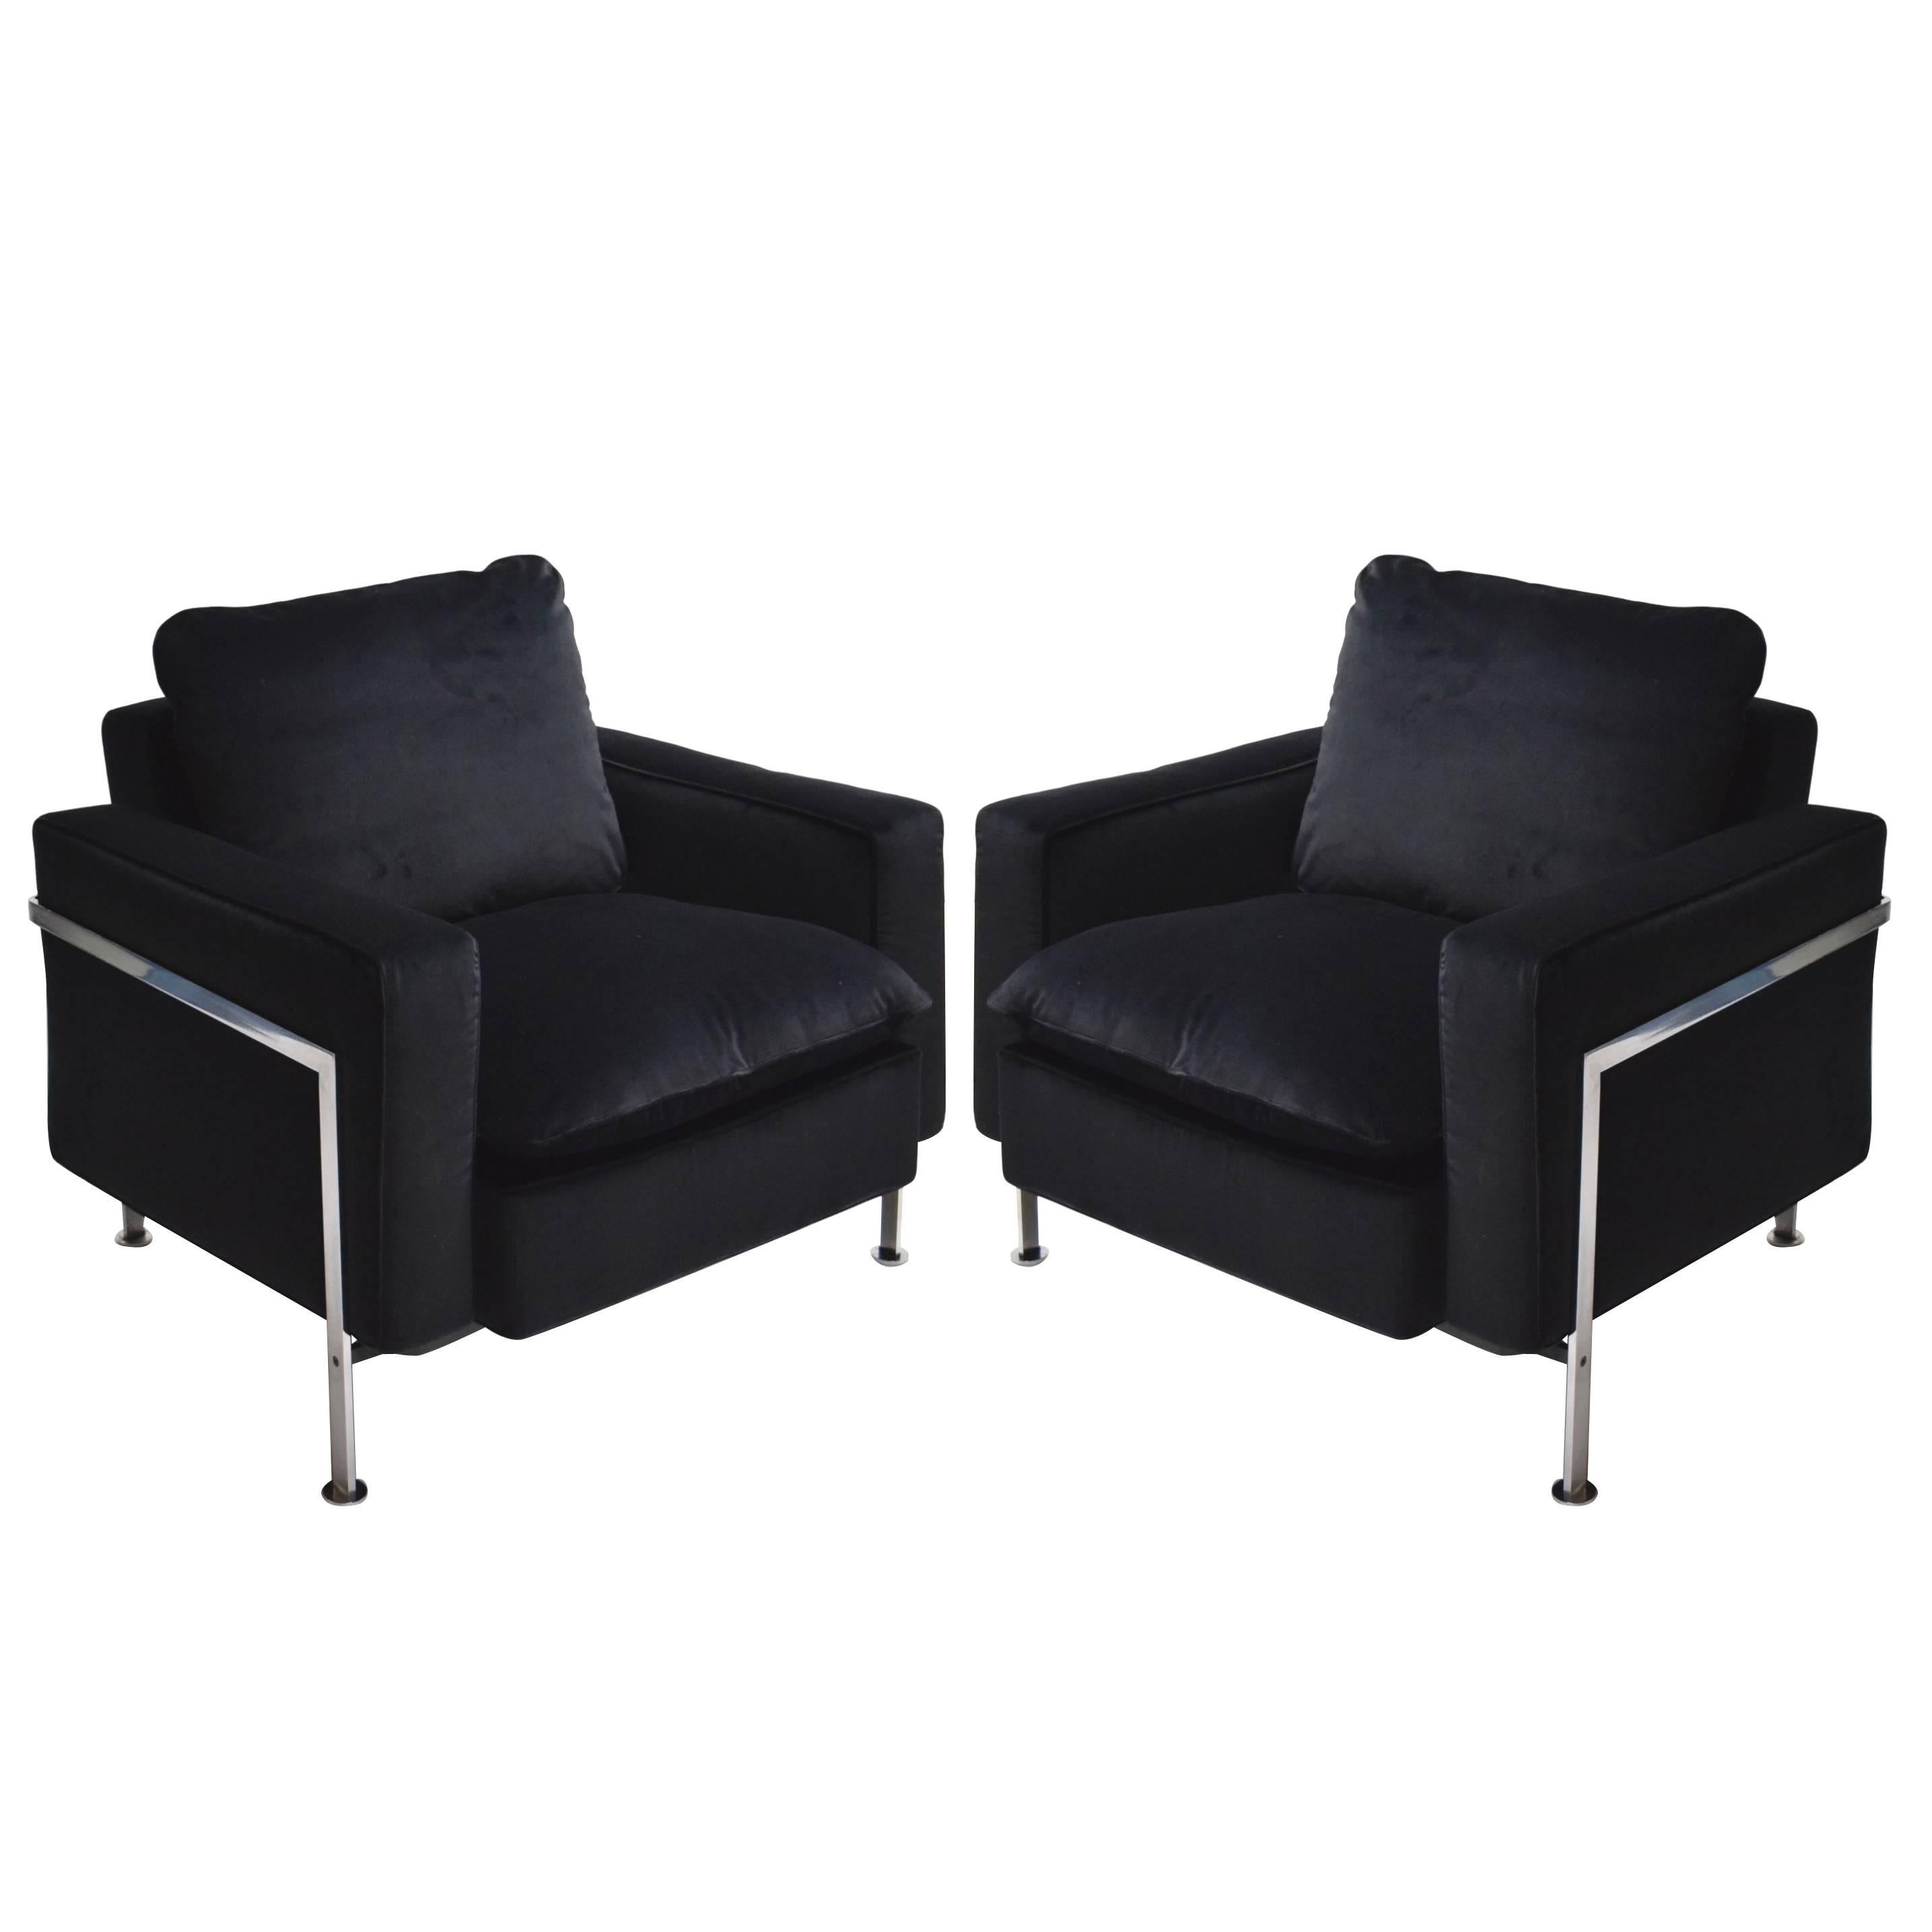 Pair of Lounge Chairs by Robert Haussman for Stendig, 1970s